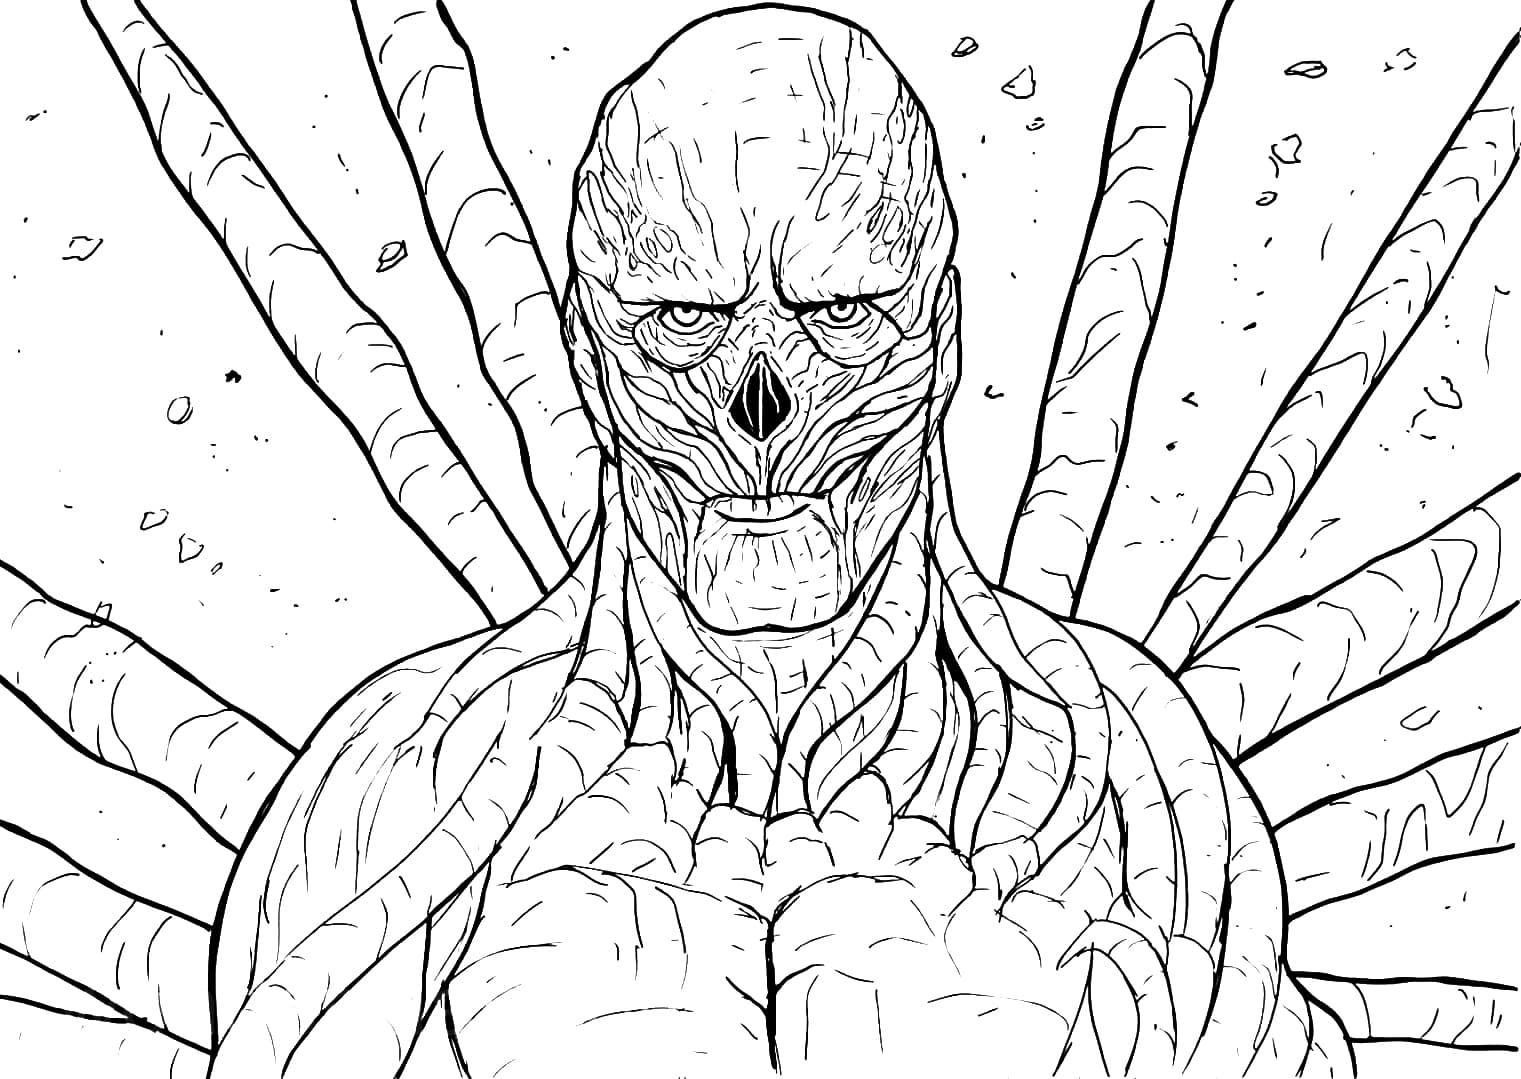 Vecna stranger things coloring page